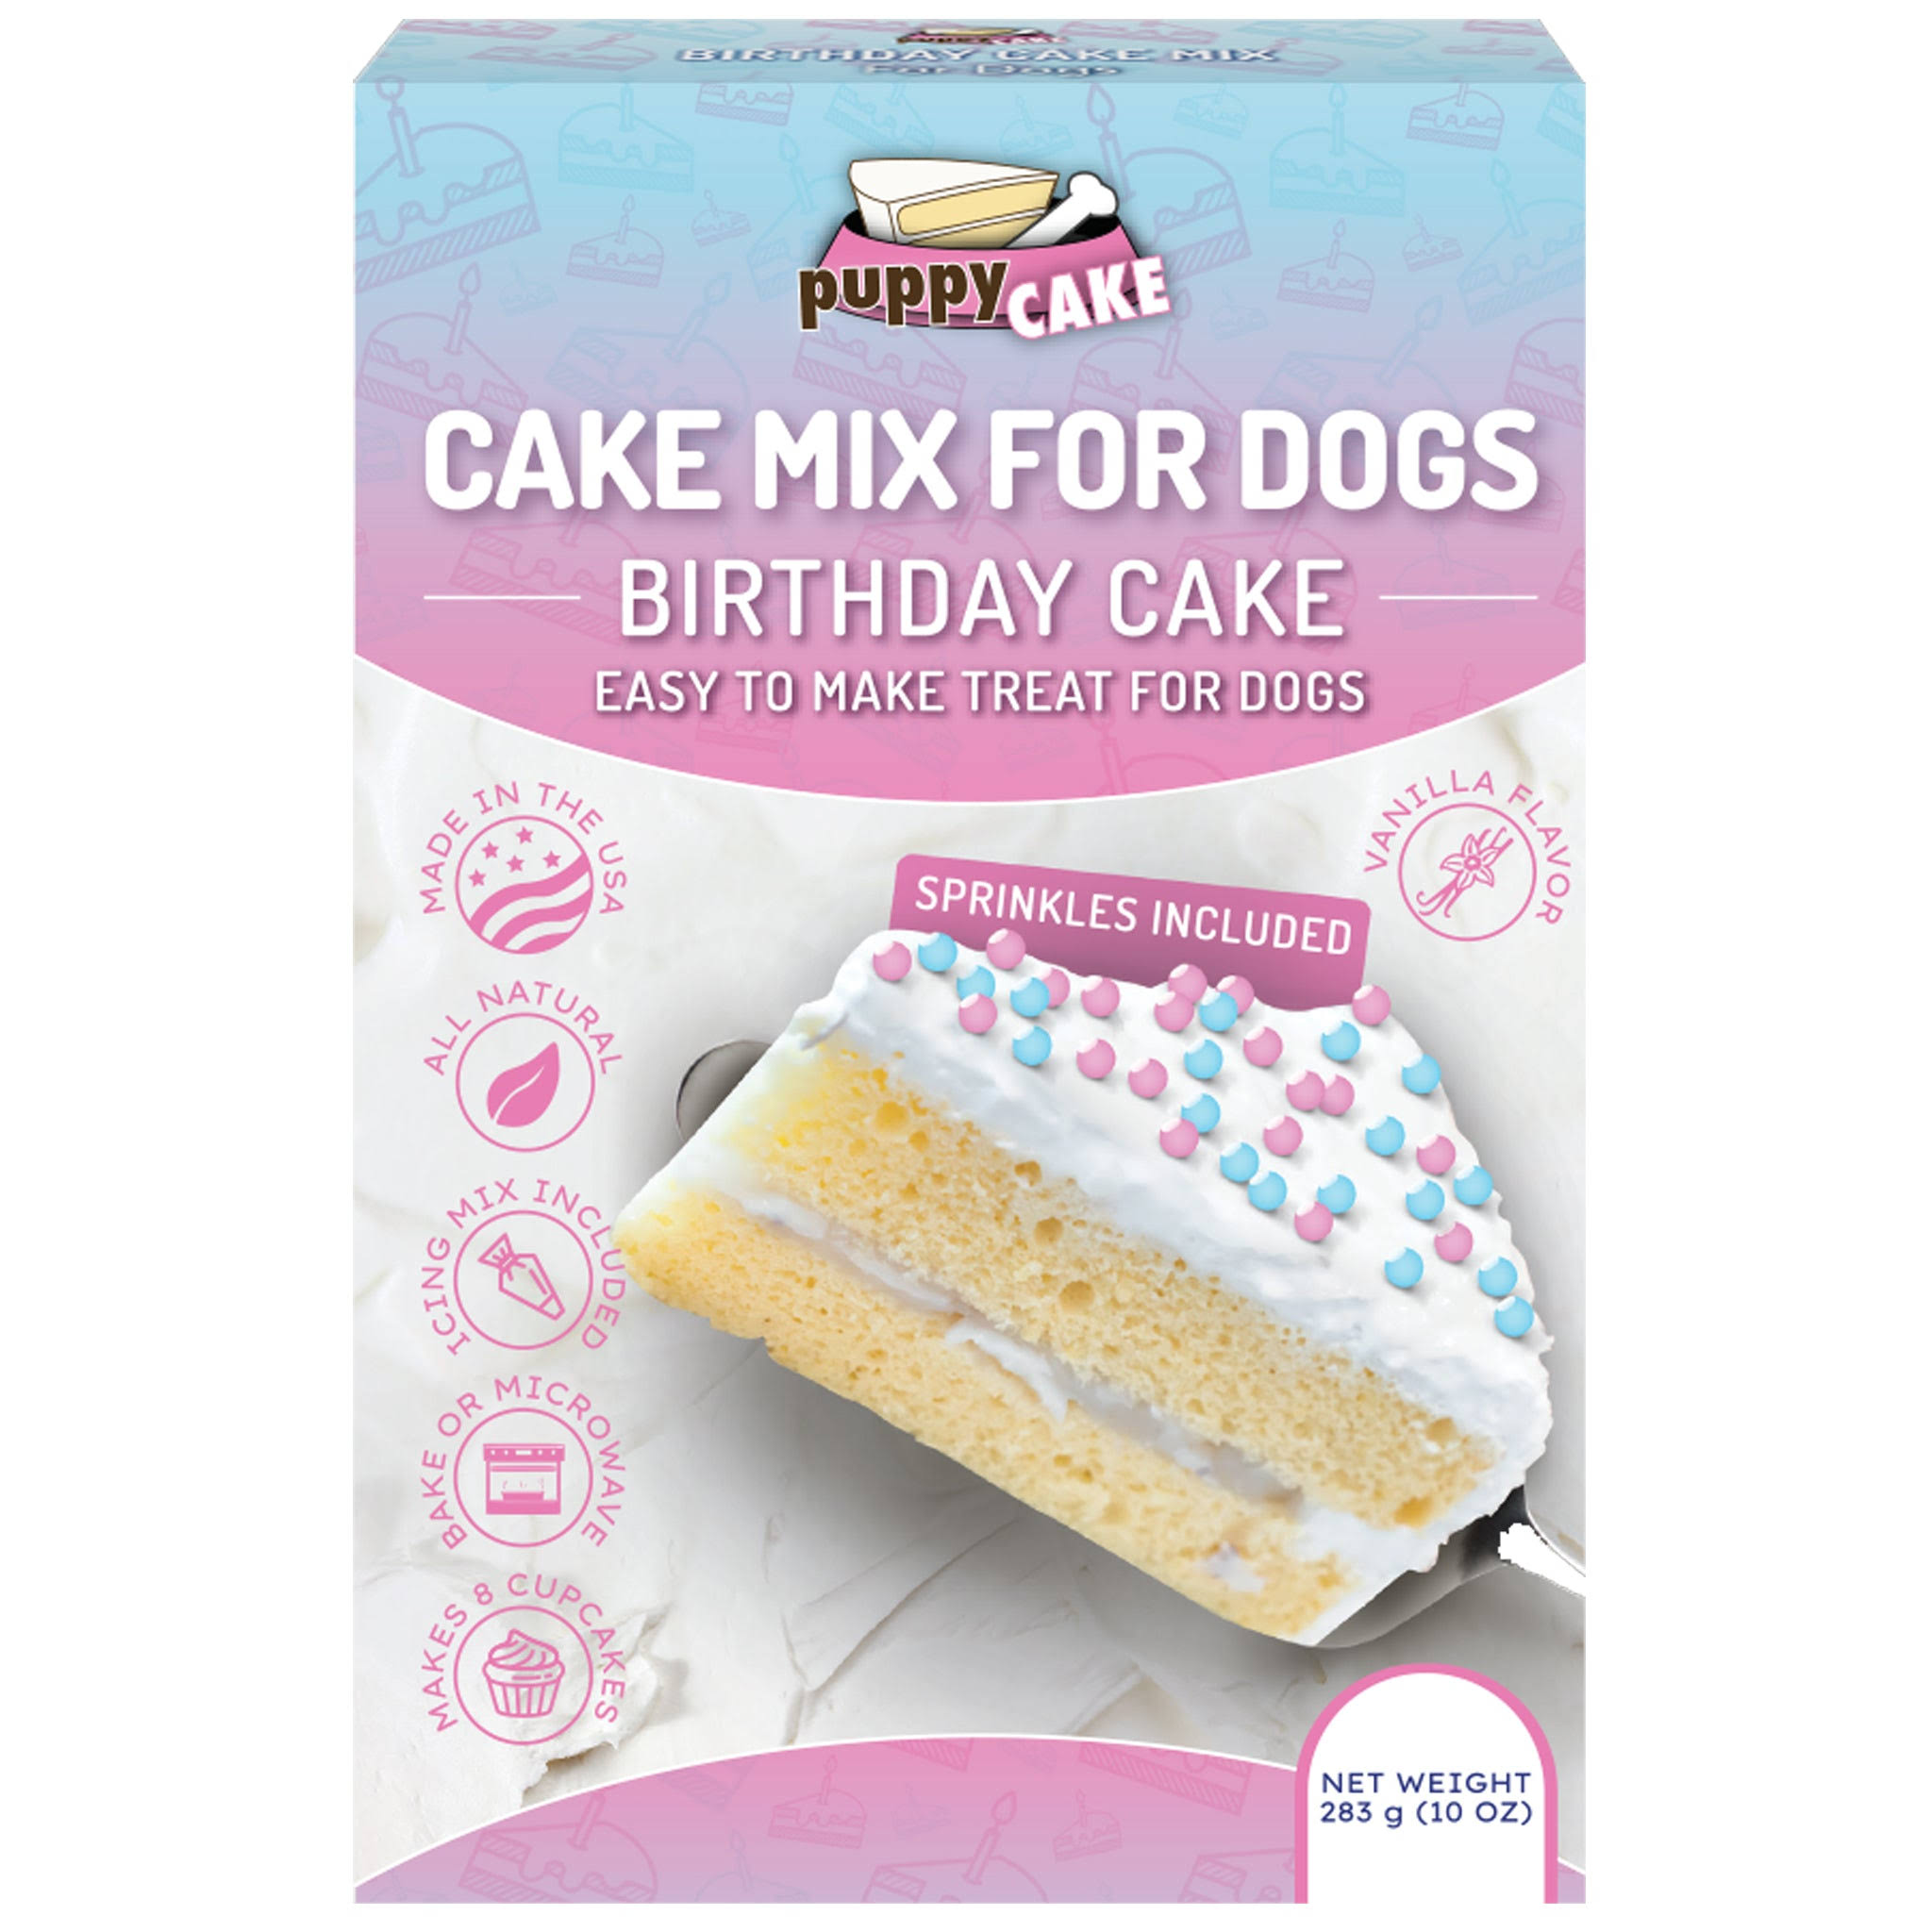 Puppy Cake Cake Mix for Dogs Birthday Cake [283g]